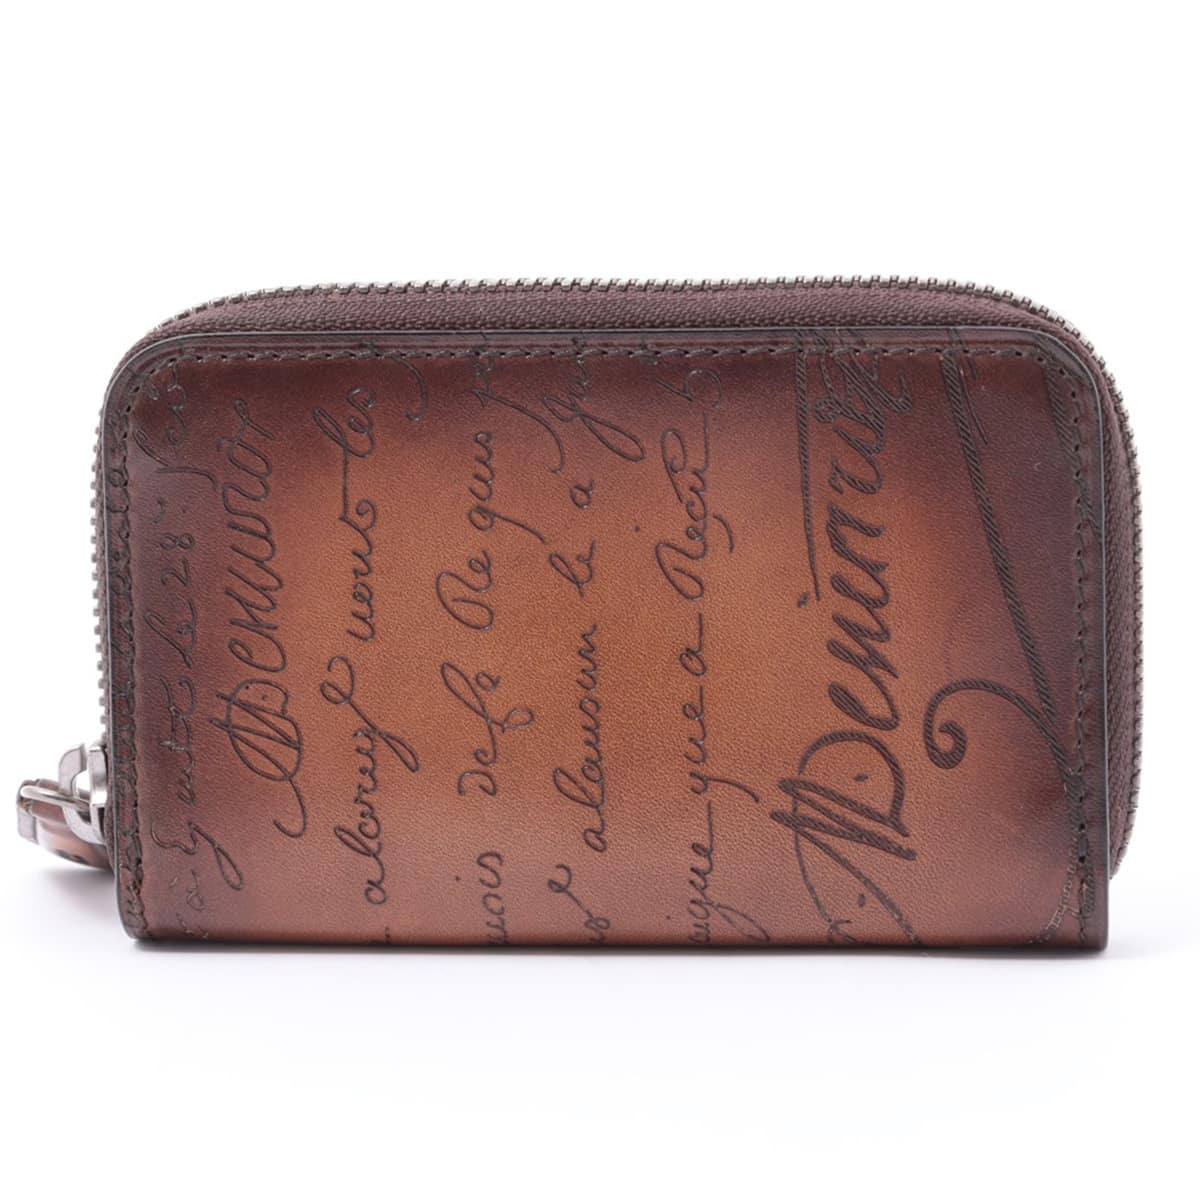 Berluti Calligraphy Leather Key Case Brown